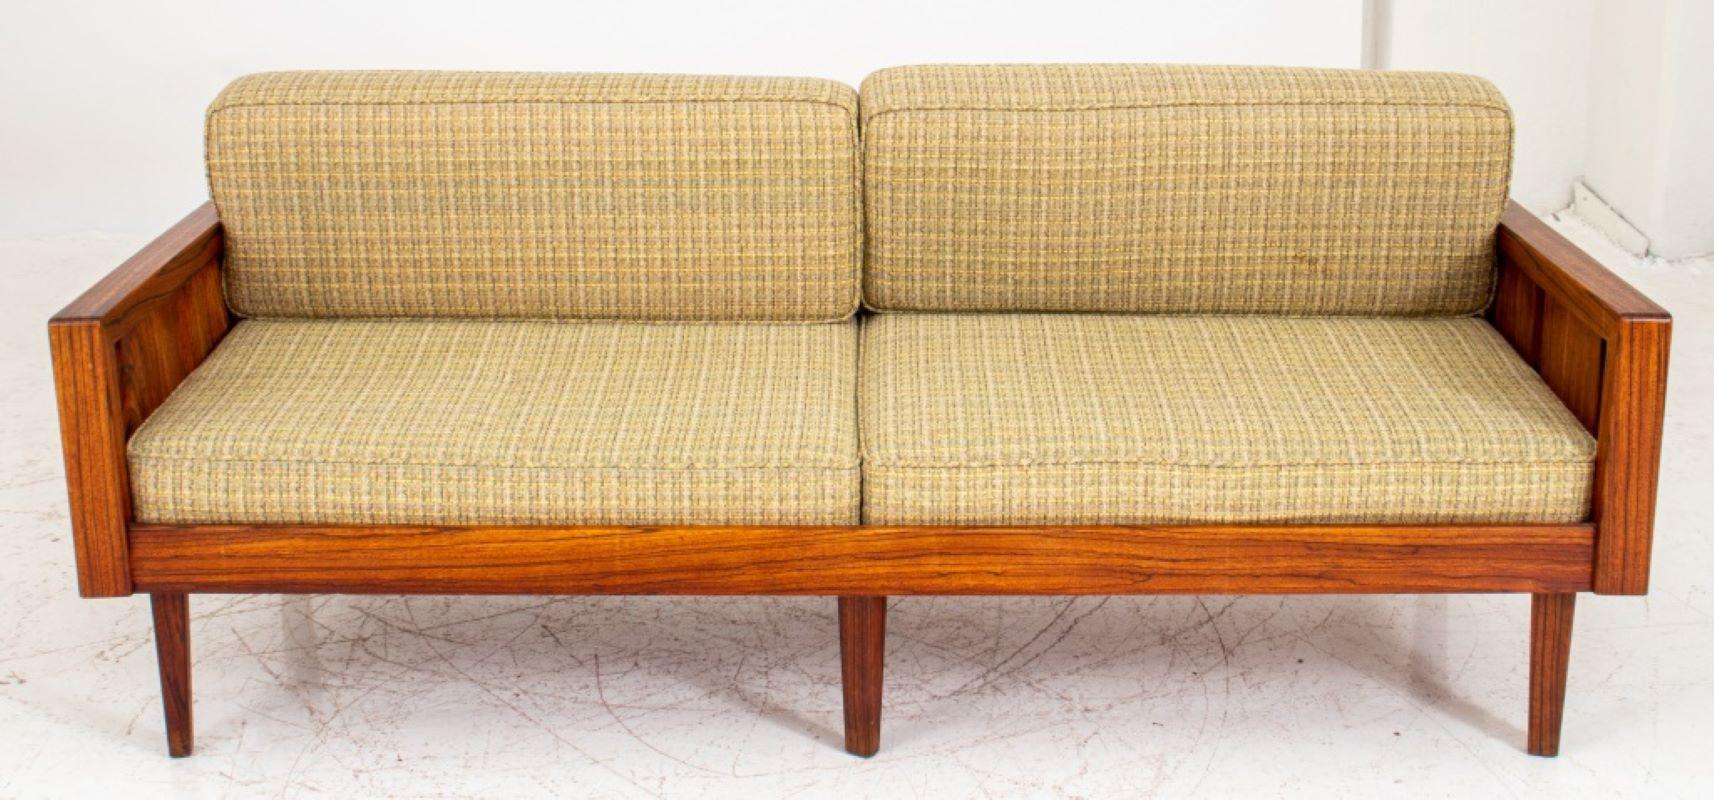 Danish Modern Brazilian Hardwood Daybed Sofa In Good Condition For Sale In New York, NY